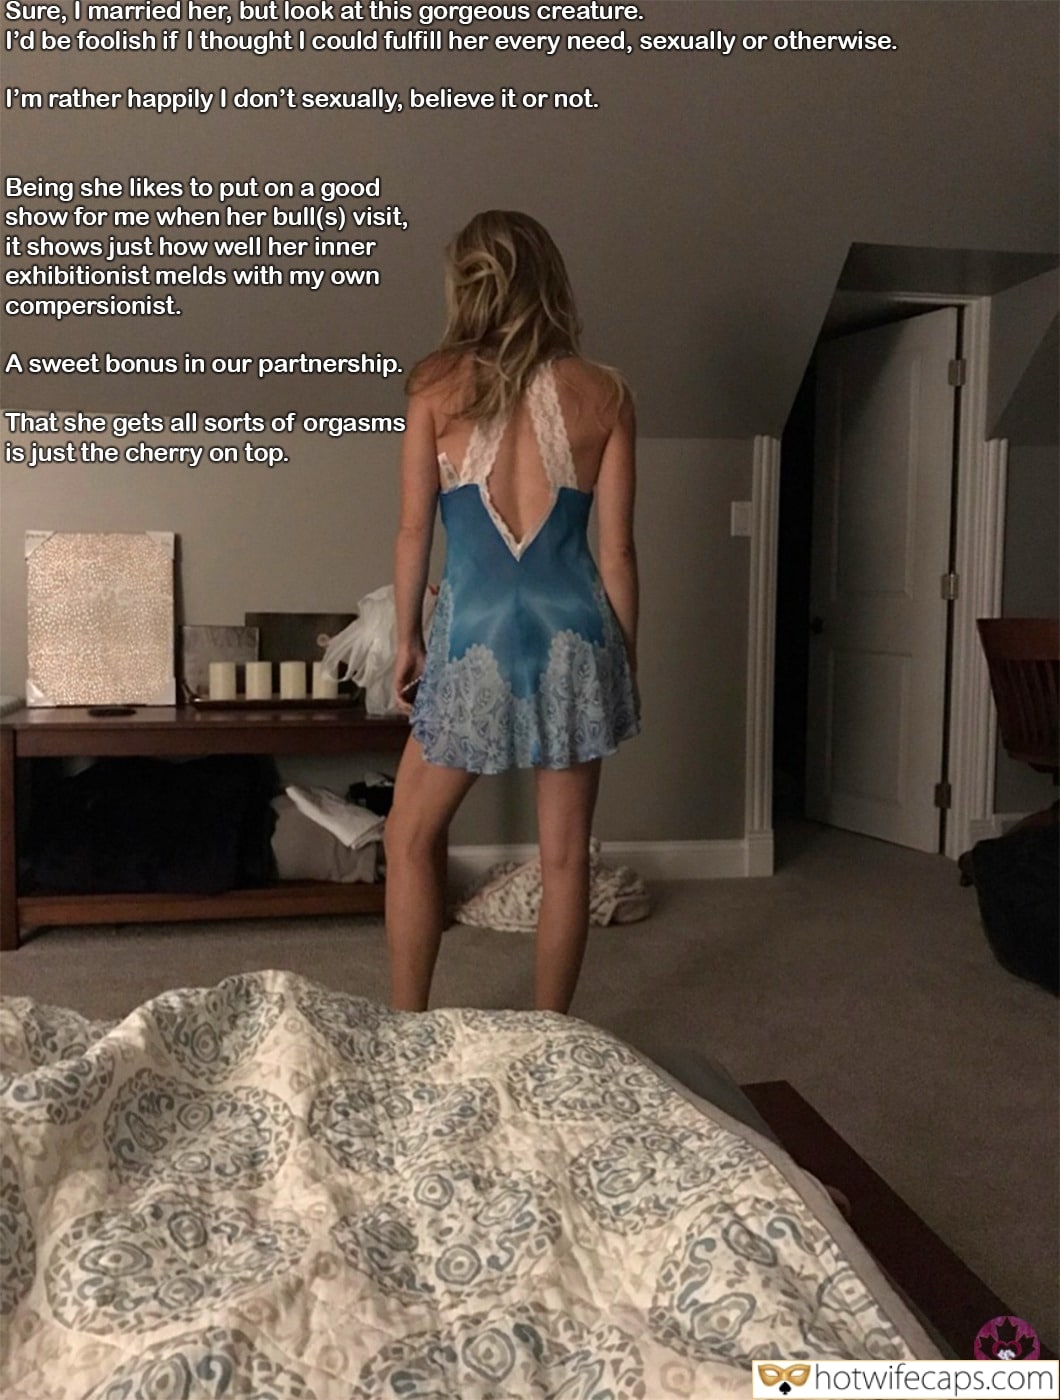 Bull, Bully, Cheating, Cuckold Stories, Sexy Memes Hotwife Caption №565134 home dress for meeting guests